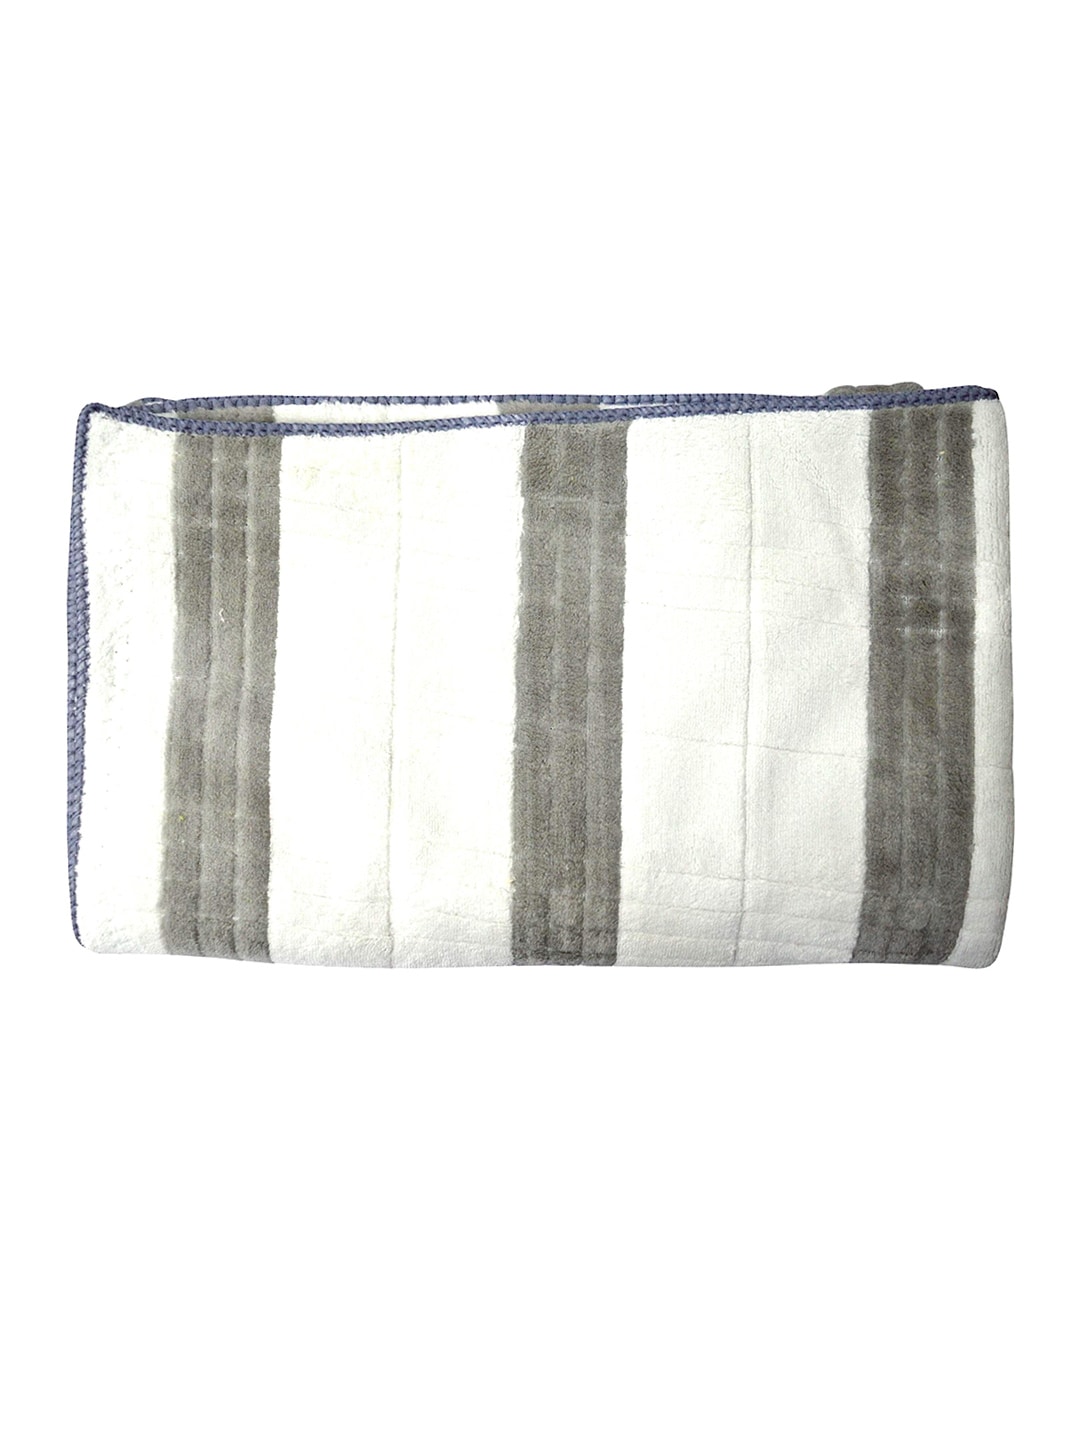 Tranquil square Grey & White Striped 650 GSM Cotton Rectangular Bath Towel Price in India